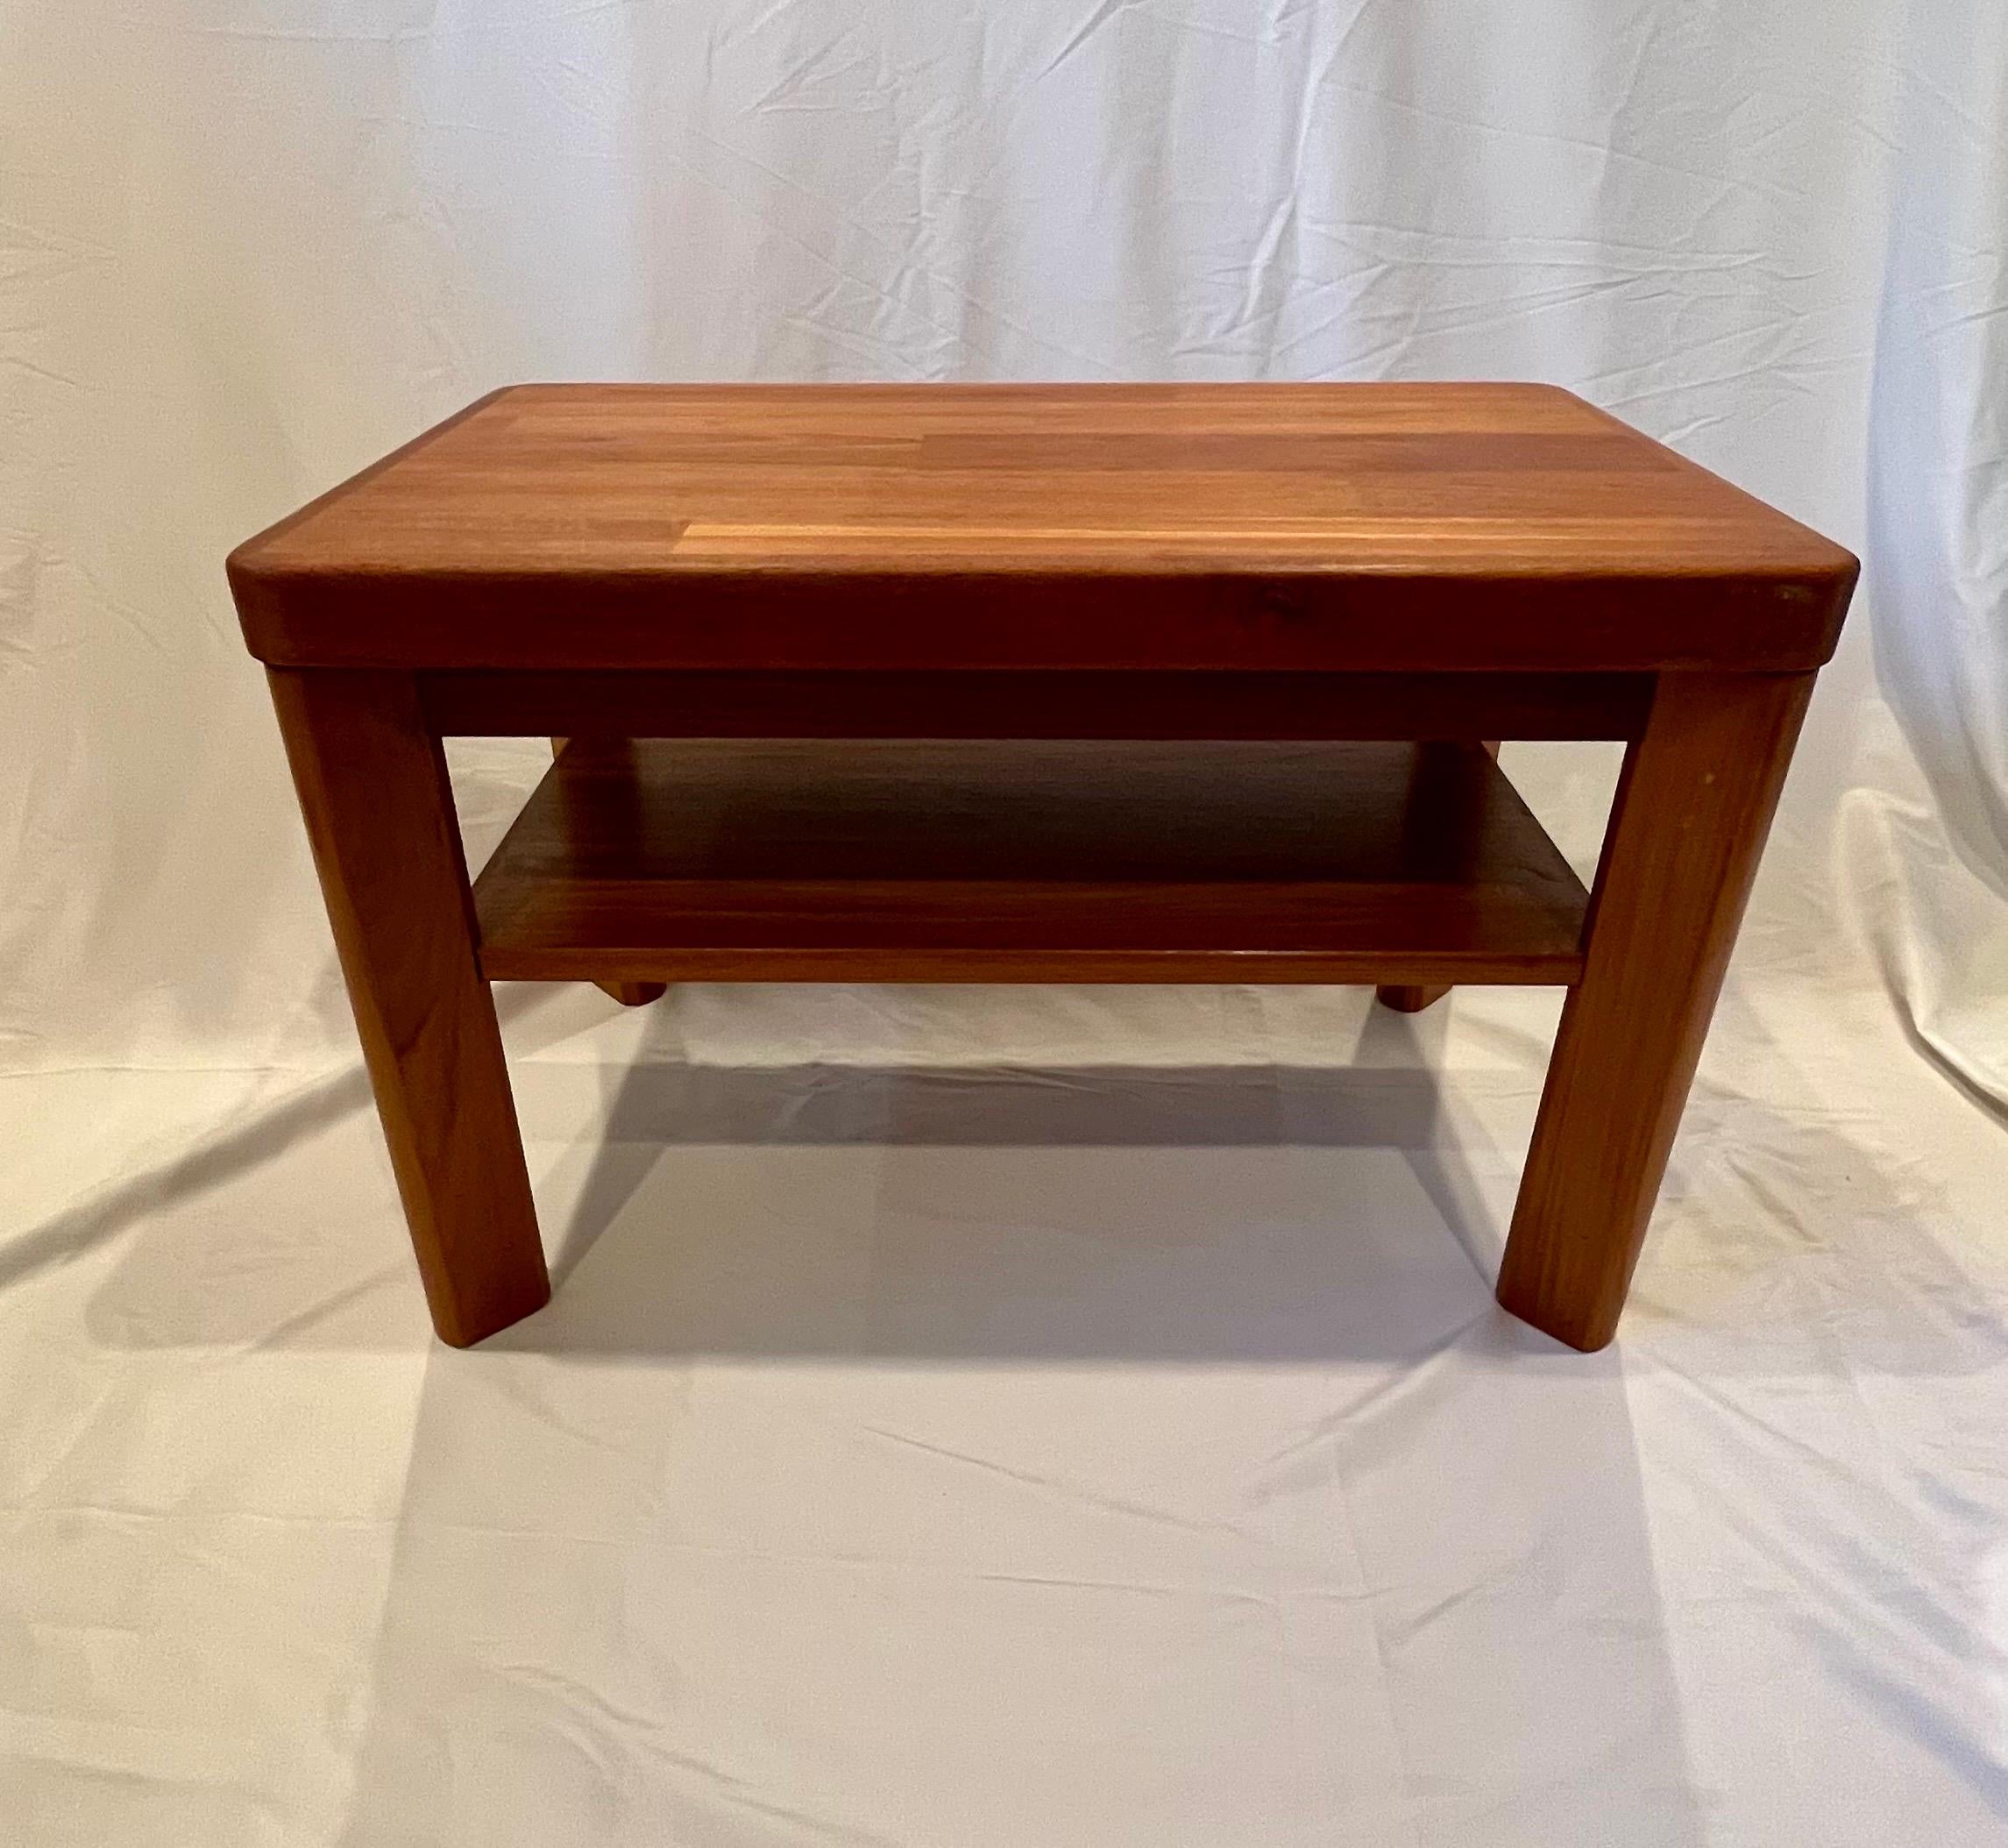 Substantial Danish modern end table by Mobelfabrikken Toften. 2 Tiers. Solid construction and classic Danish design.
Curbside to NYC/Philly $400